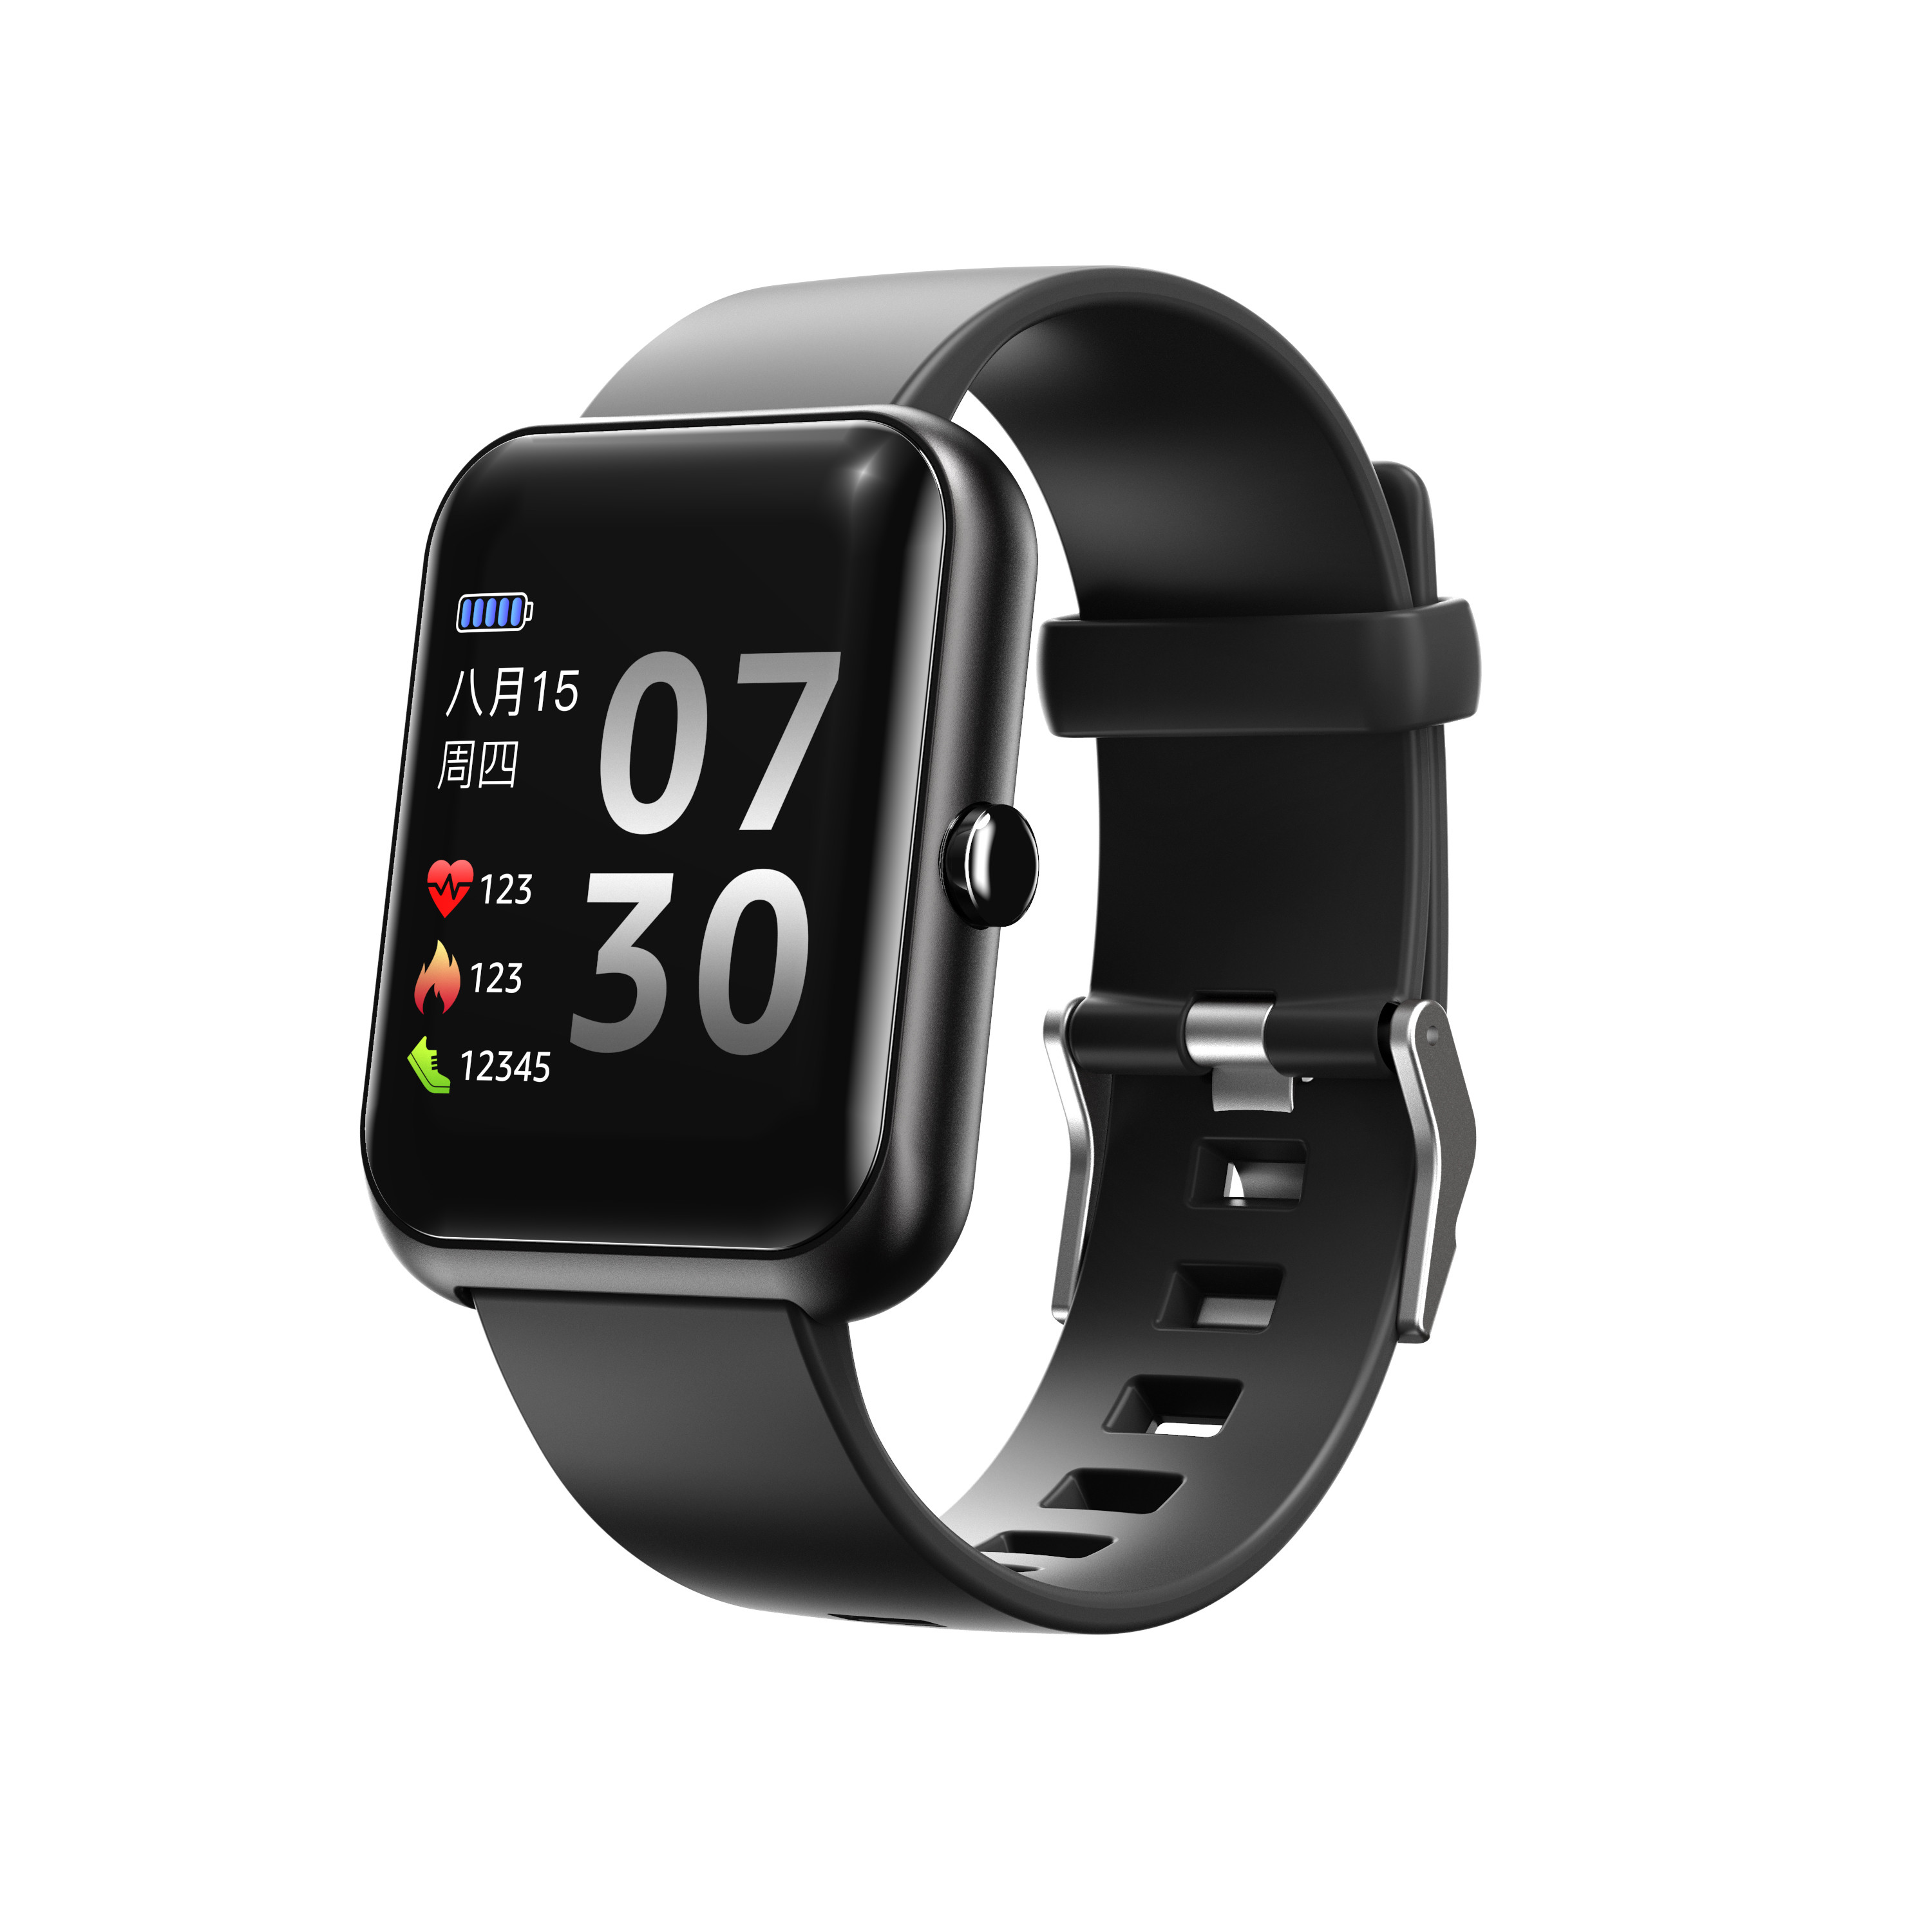 Quality Smart Watch S20 Android/IOS System Full Screen Touch Smart Bracelet IP68 Waterproof Health Monitor Sport Smart Watch wholesale